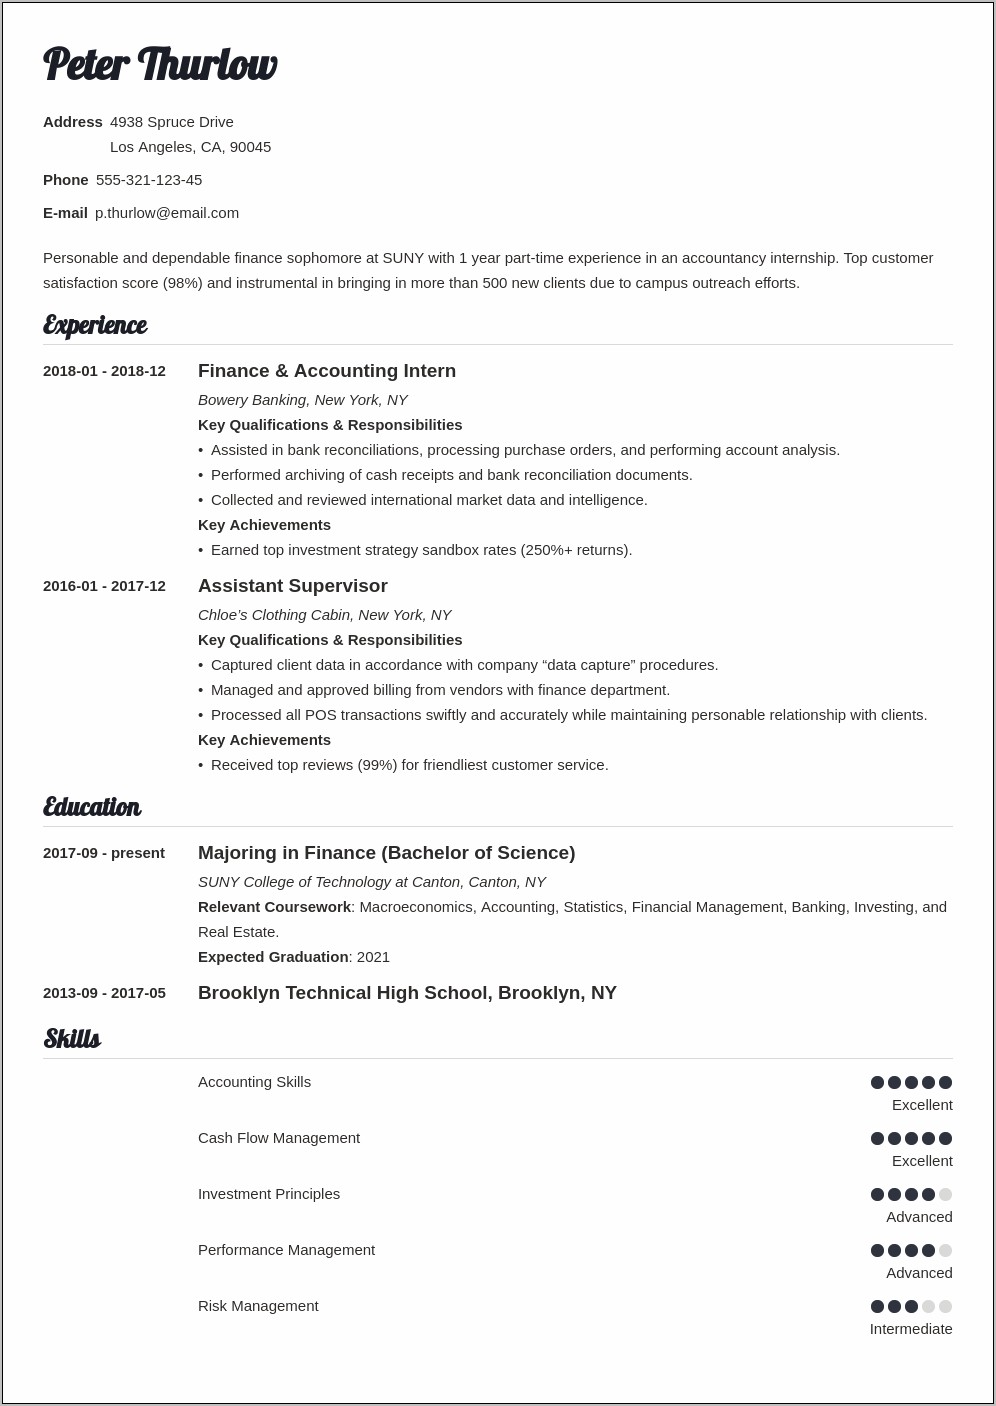 Resume Objective To Send To Recommender